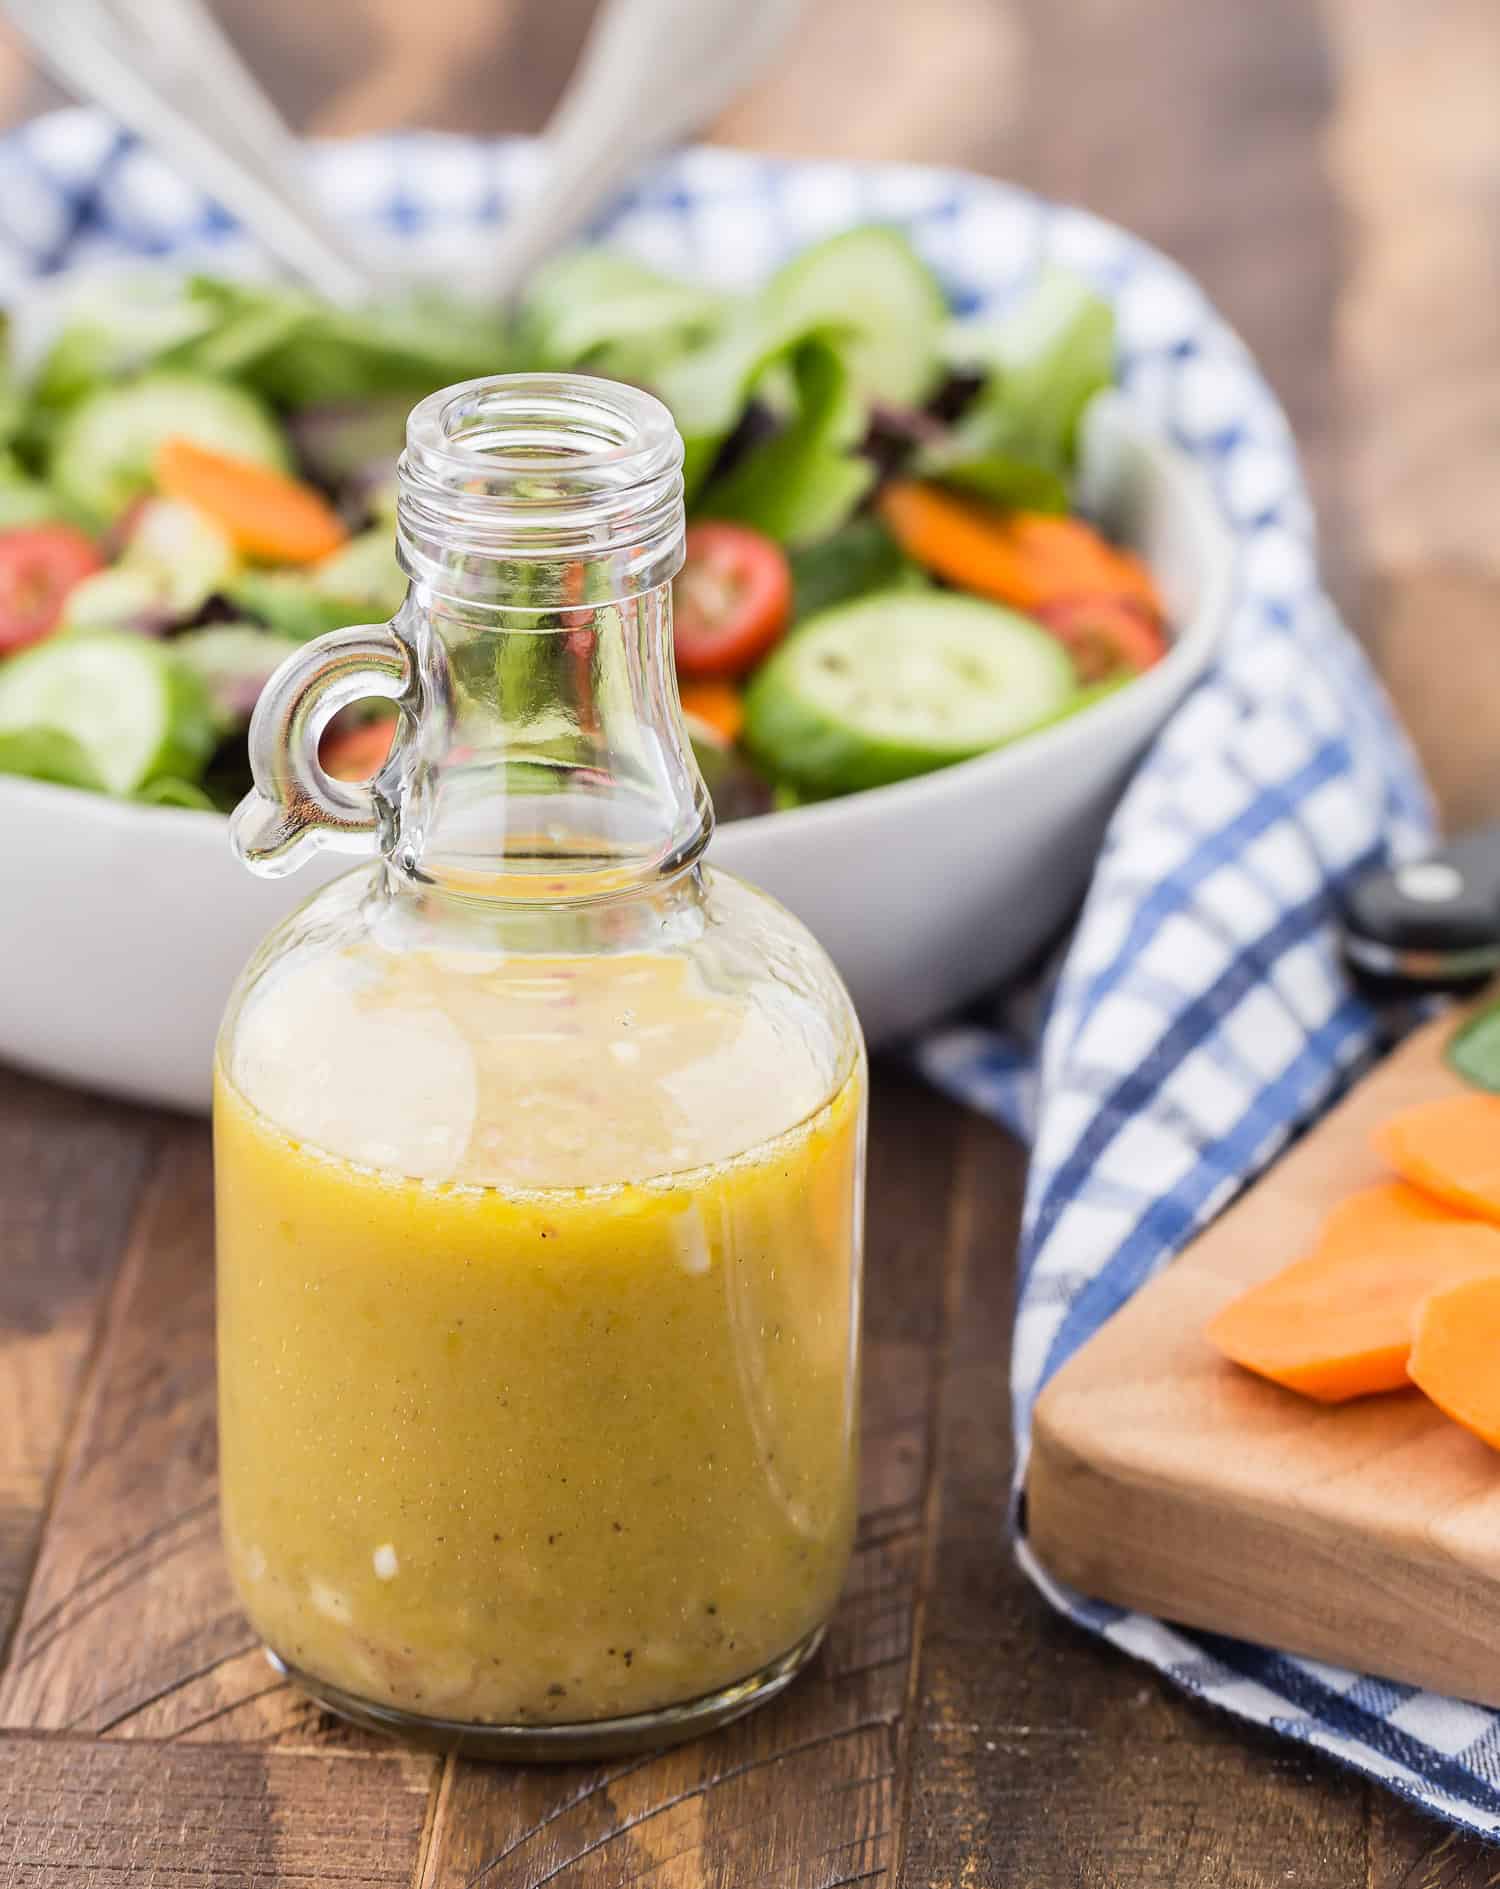 White wine vinaigrette salad dressing in a small clear glass jar.